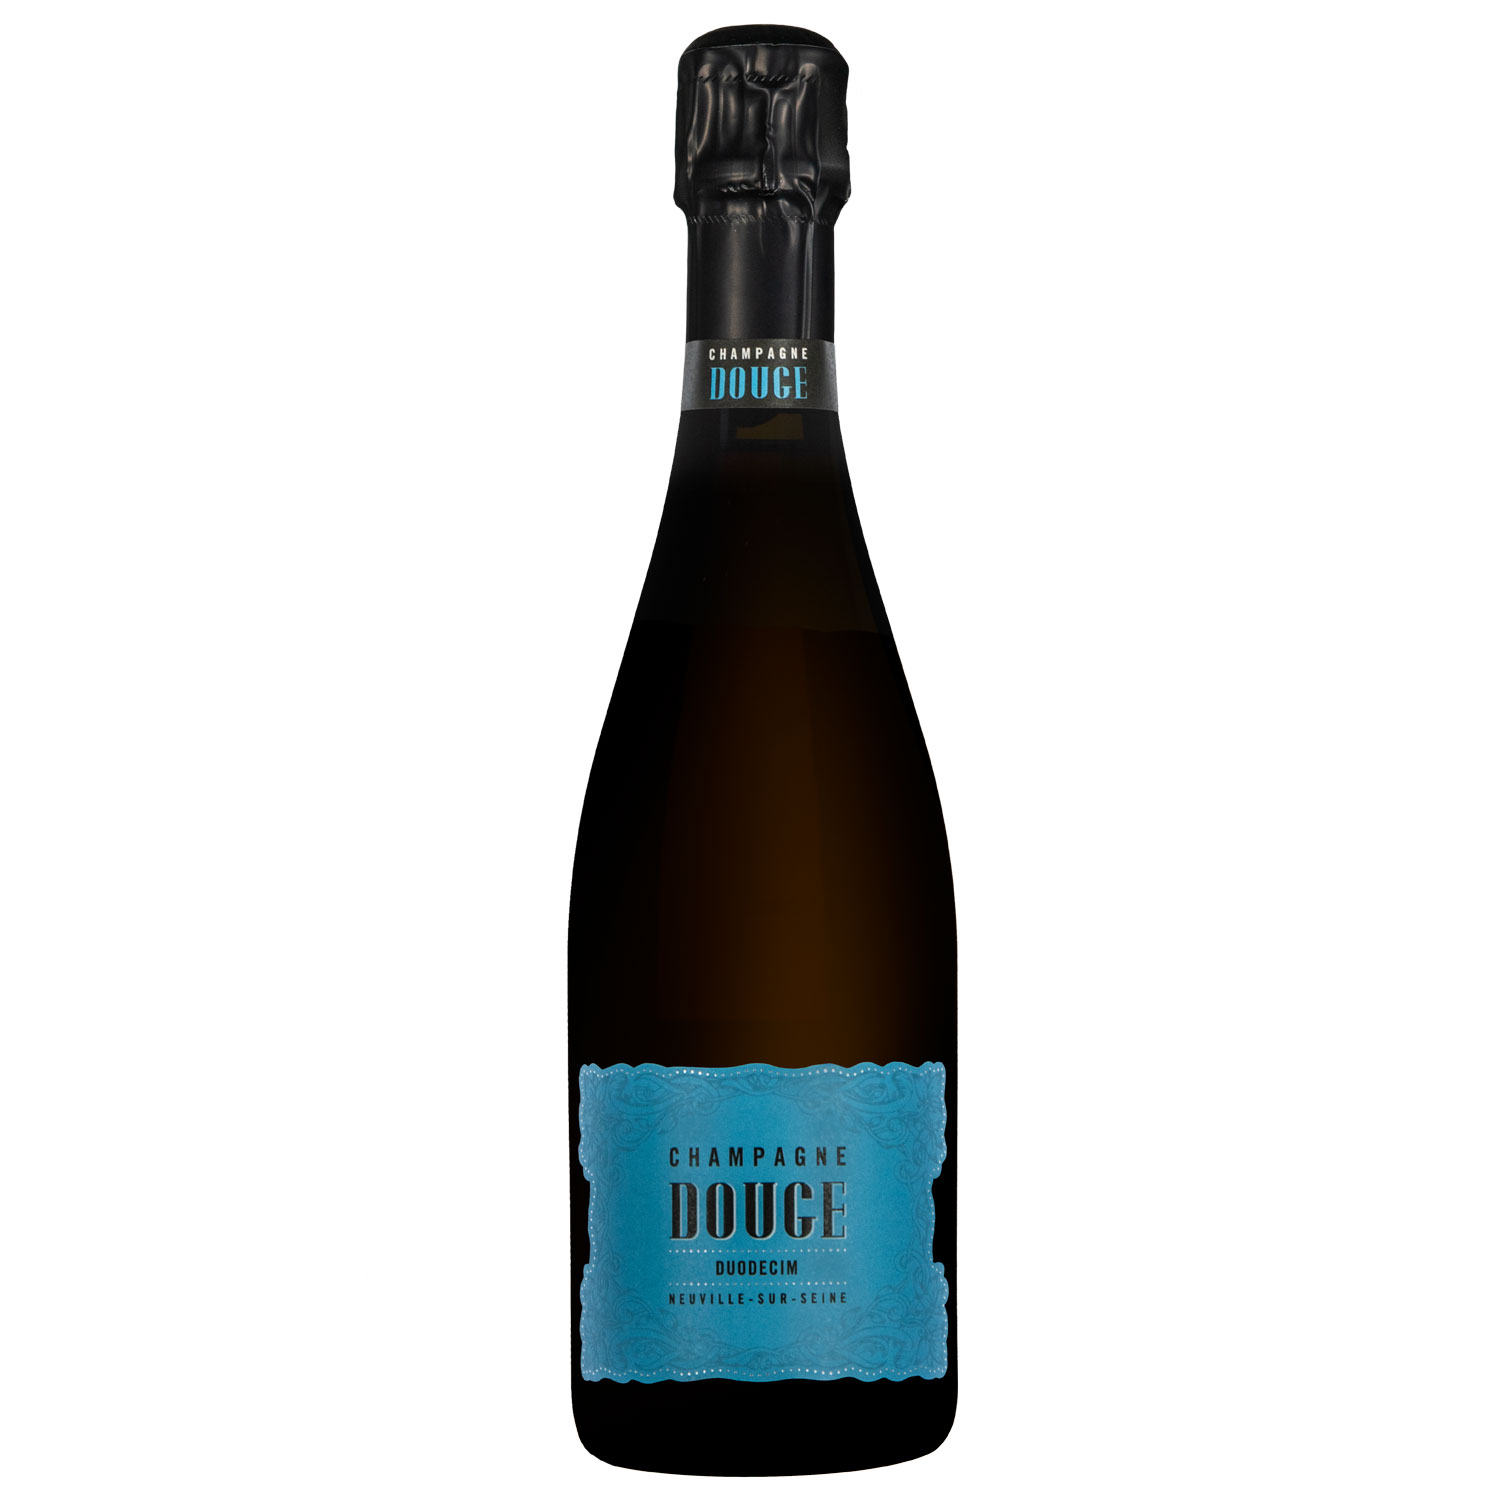 Champagne Douge: Duodecim extra brut